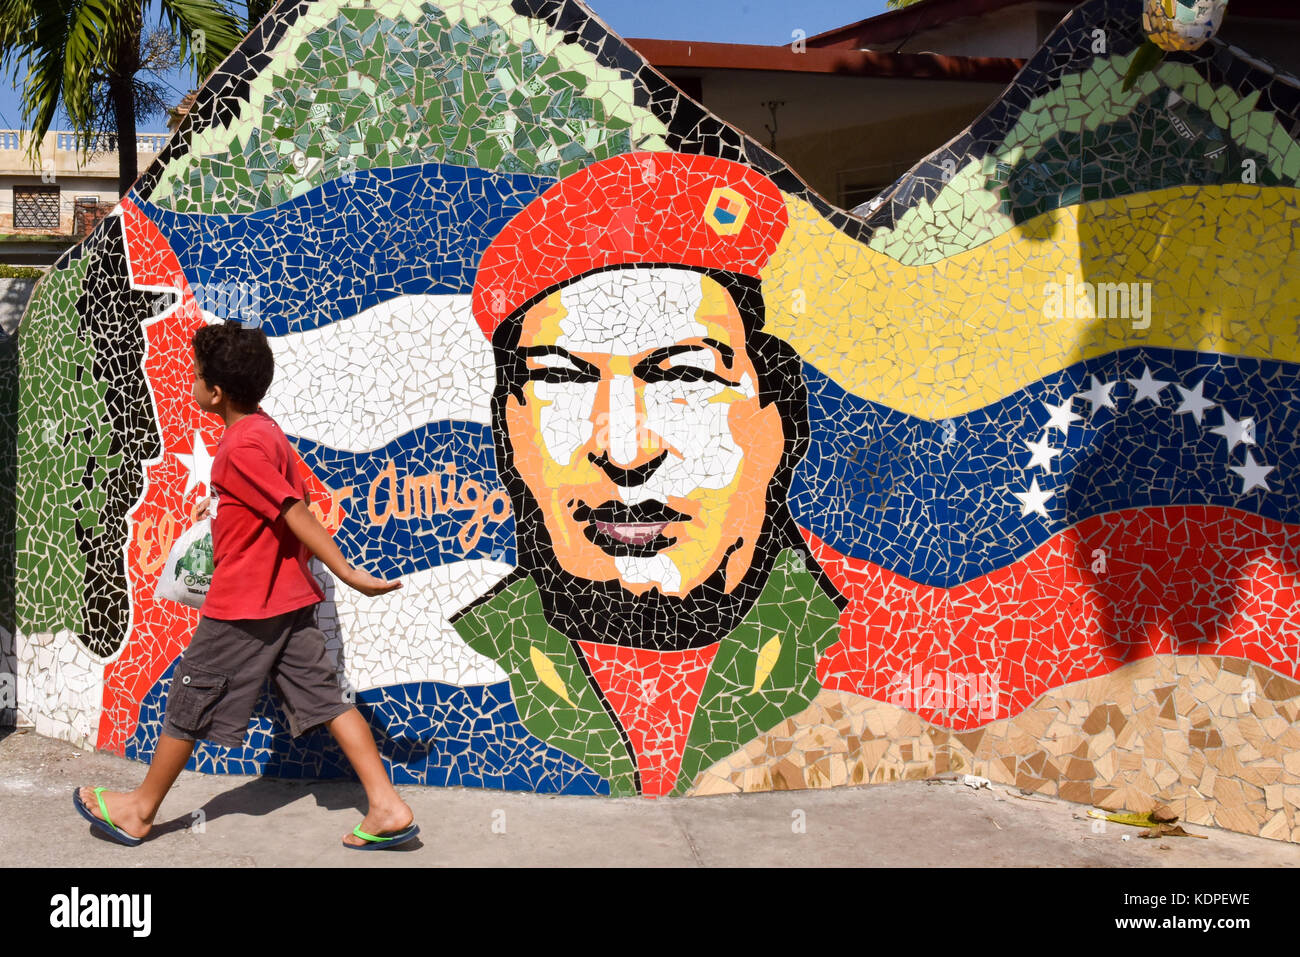 A Mural of Chavez in Fusterlandia, an art complex is named after its creator Jose Fuster was established in Jaimanitas, an economically depressed area close to Havana Cuba Stock Photo